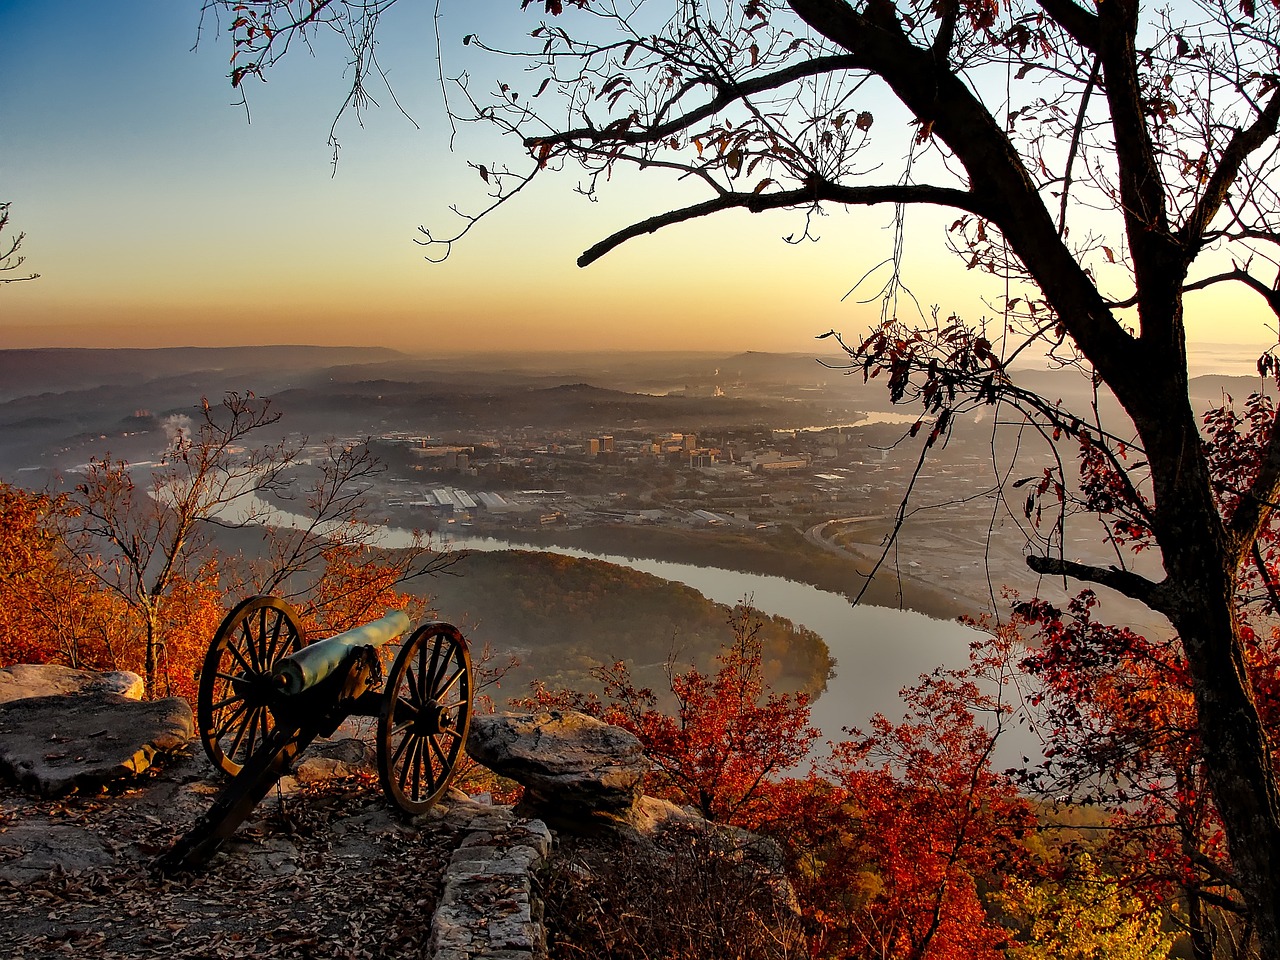 Chattanooga Ghosts and Local Delights